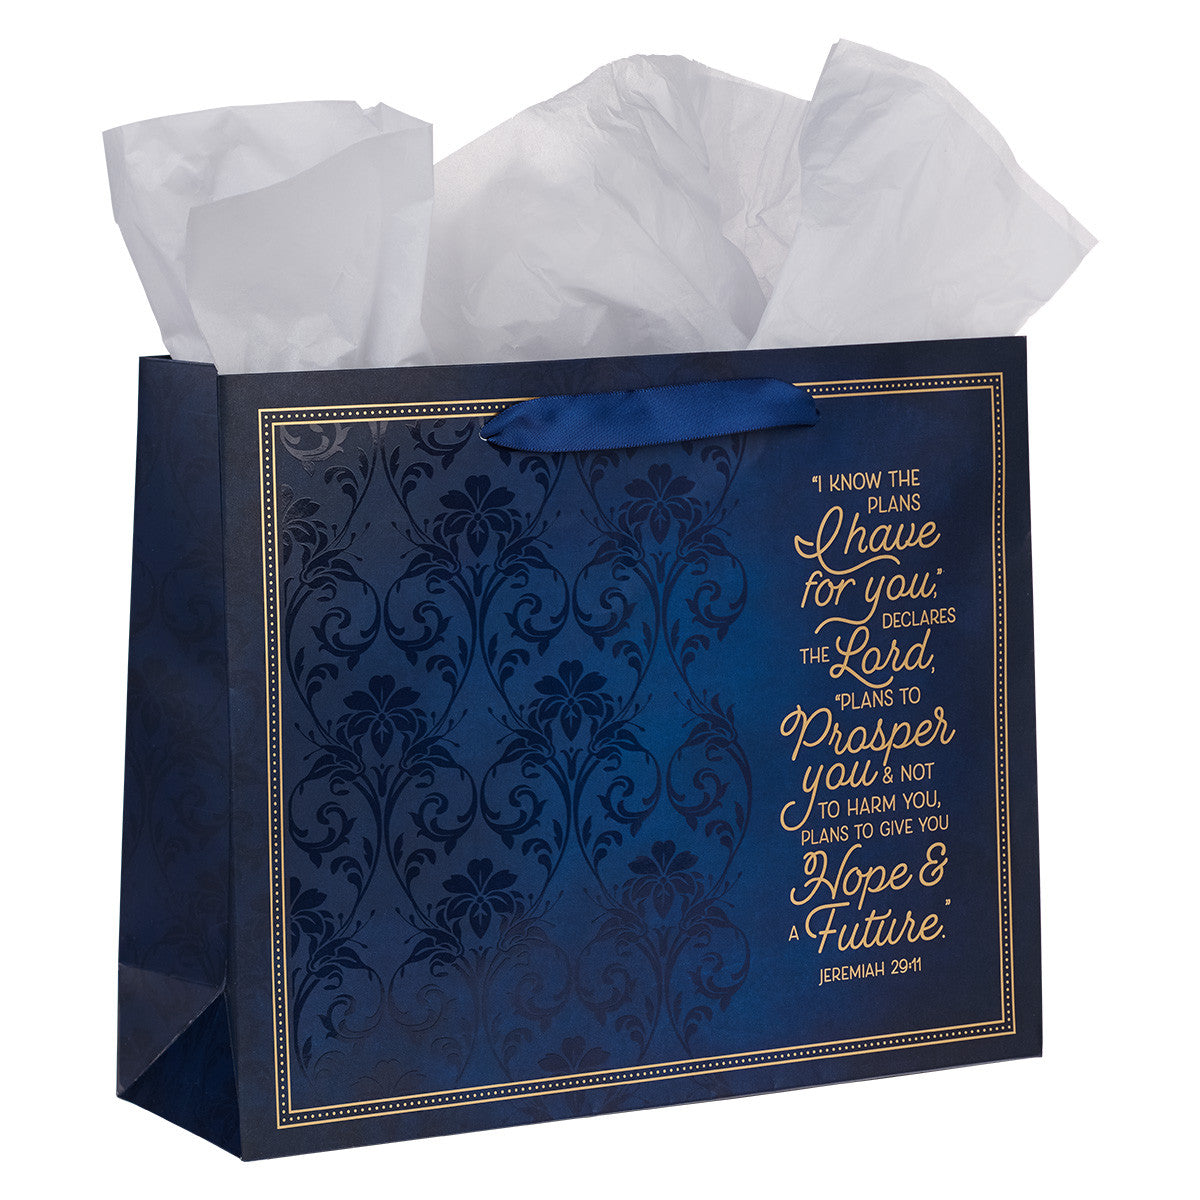 I Know The Plans Blue Floral Trellis Large Landscape Gift Bag with Card - Jeremiah 29:11 - The Christian Gift Company